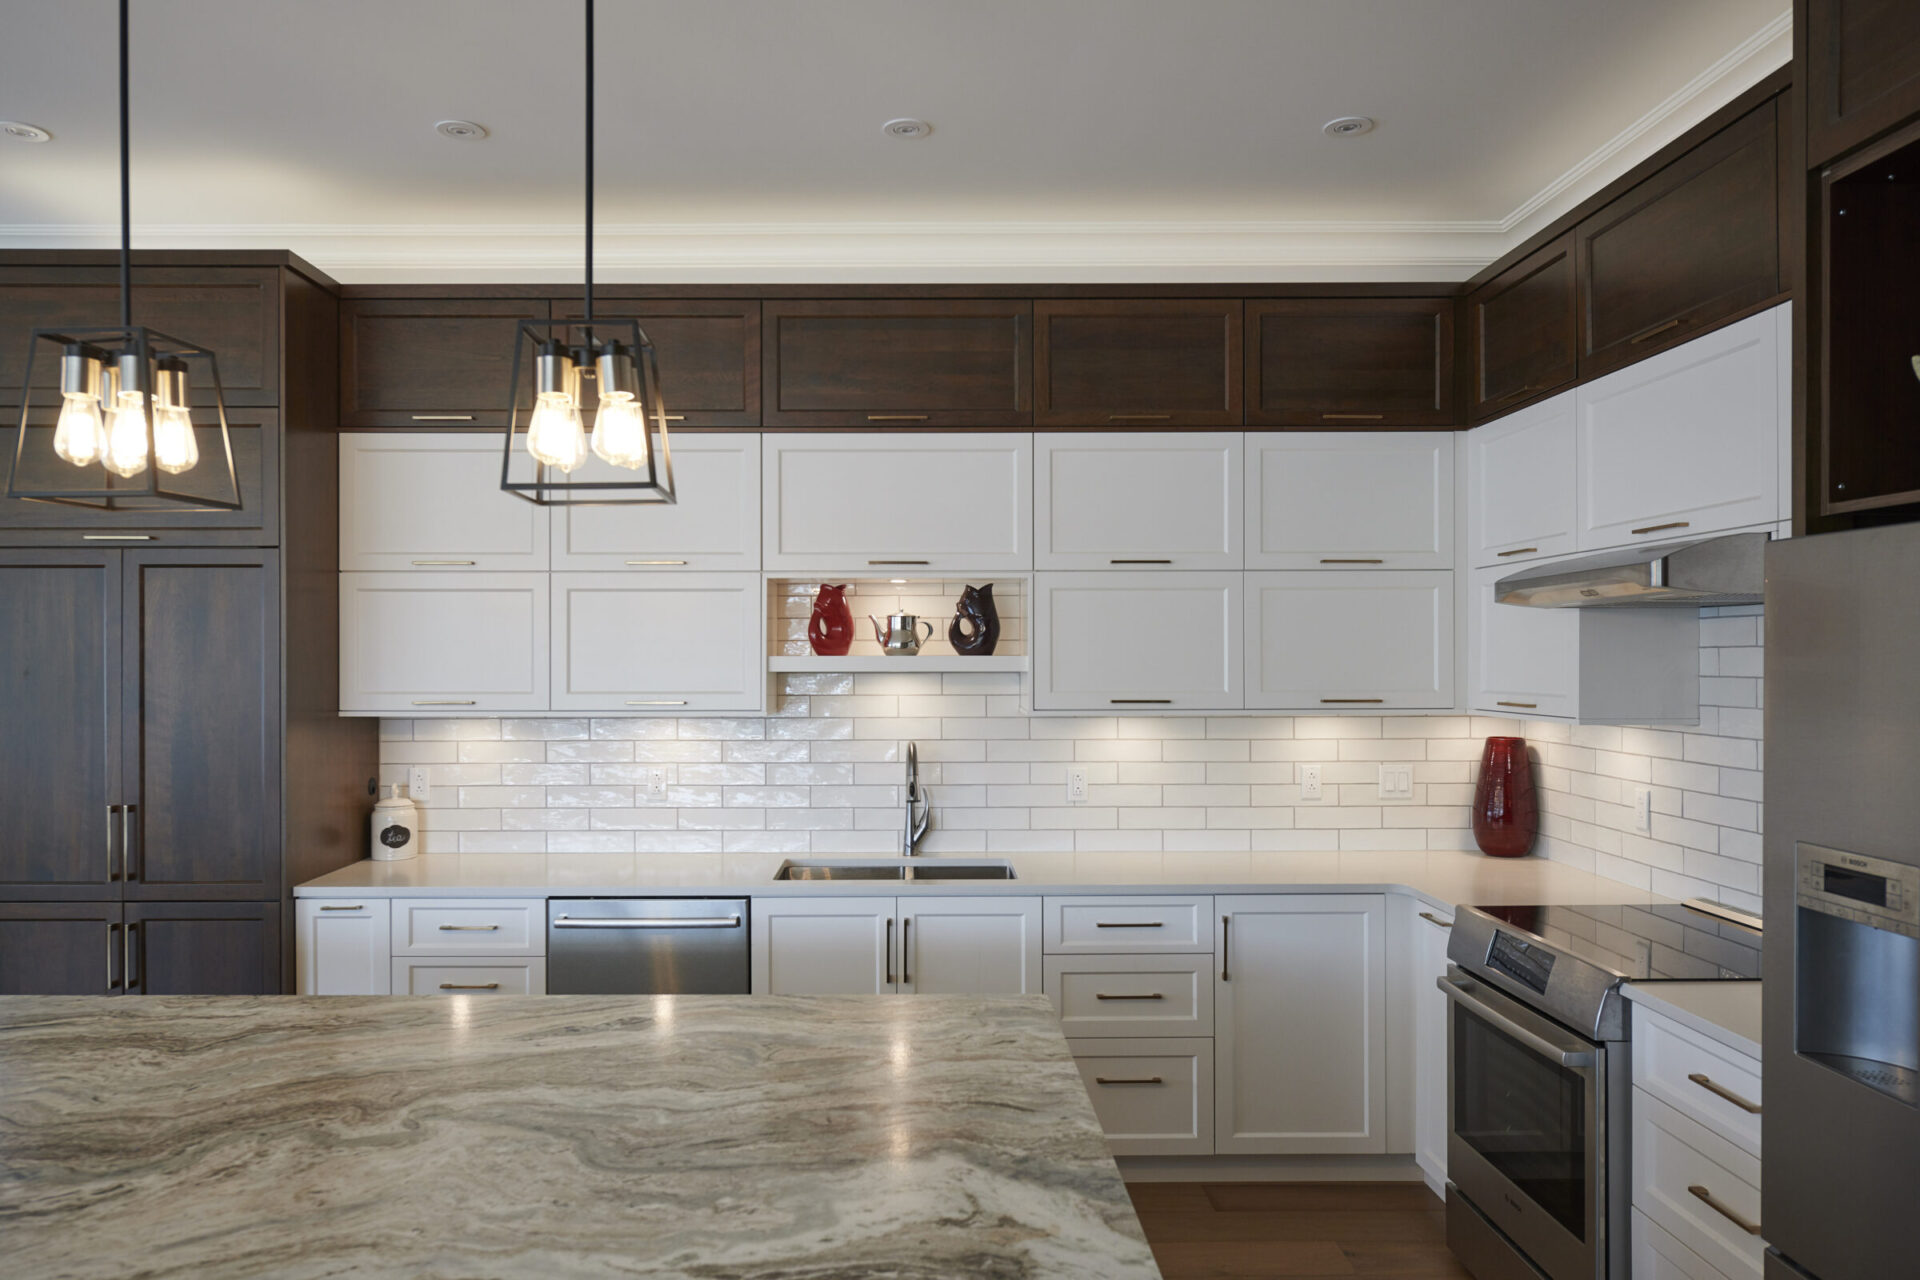 Modern kitchen with white cabinets, dark countertops, stainless steel appliances, subway tiles backsplash, and pendant lights. Clean, stylish interior design.